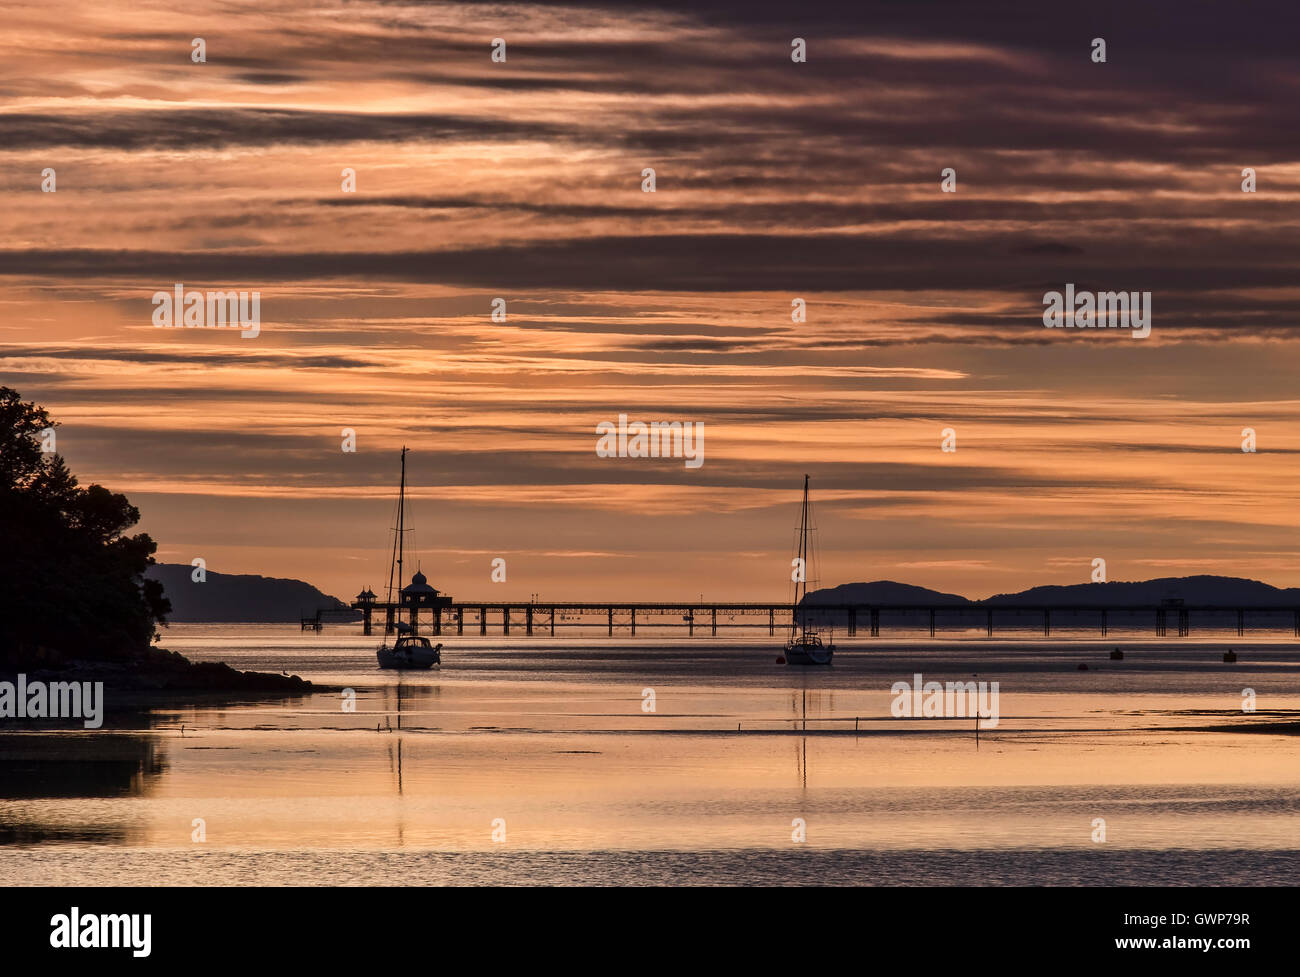 Sunrise Over The Menai Straits, Bangor Pier & The Great Orme, Anglesey, North Wales, UK Stock Photo